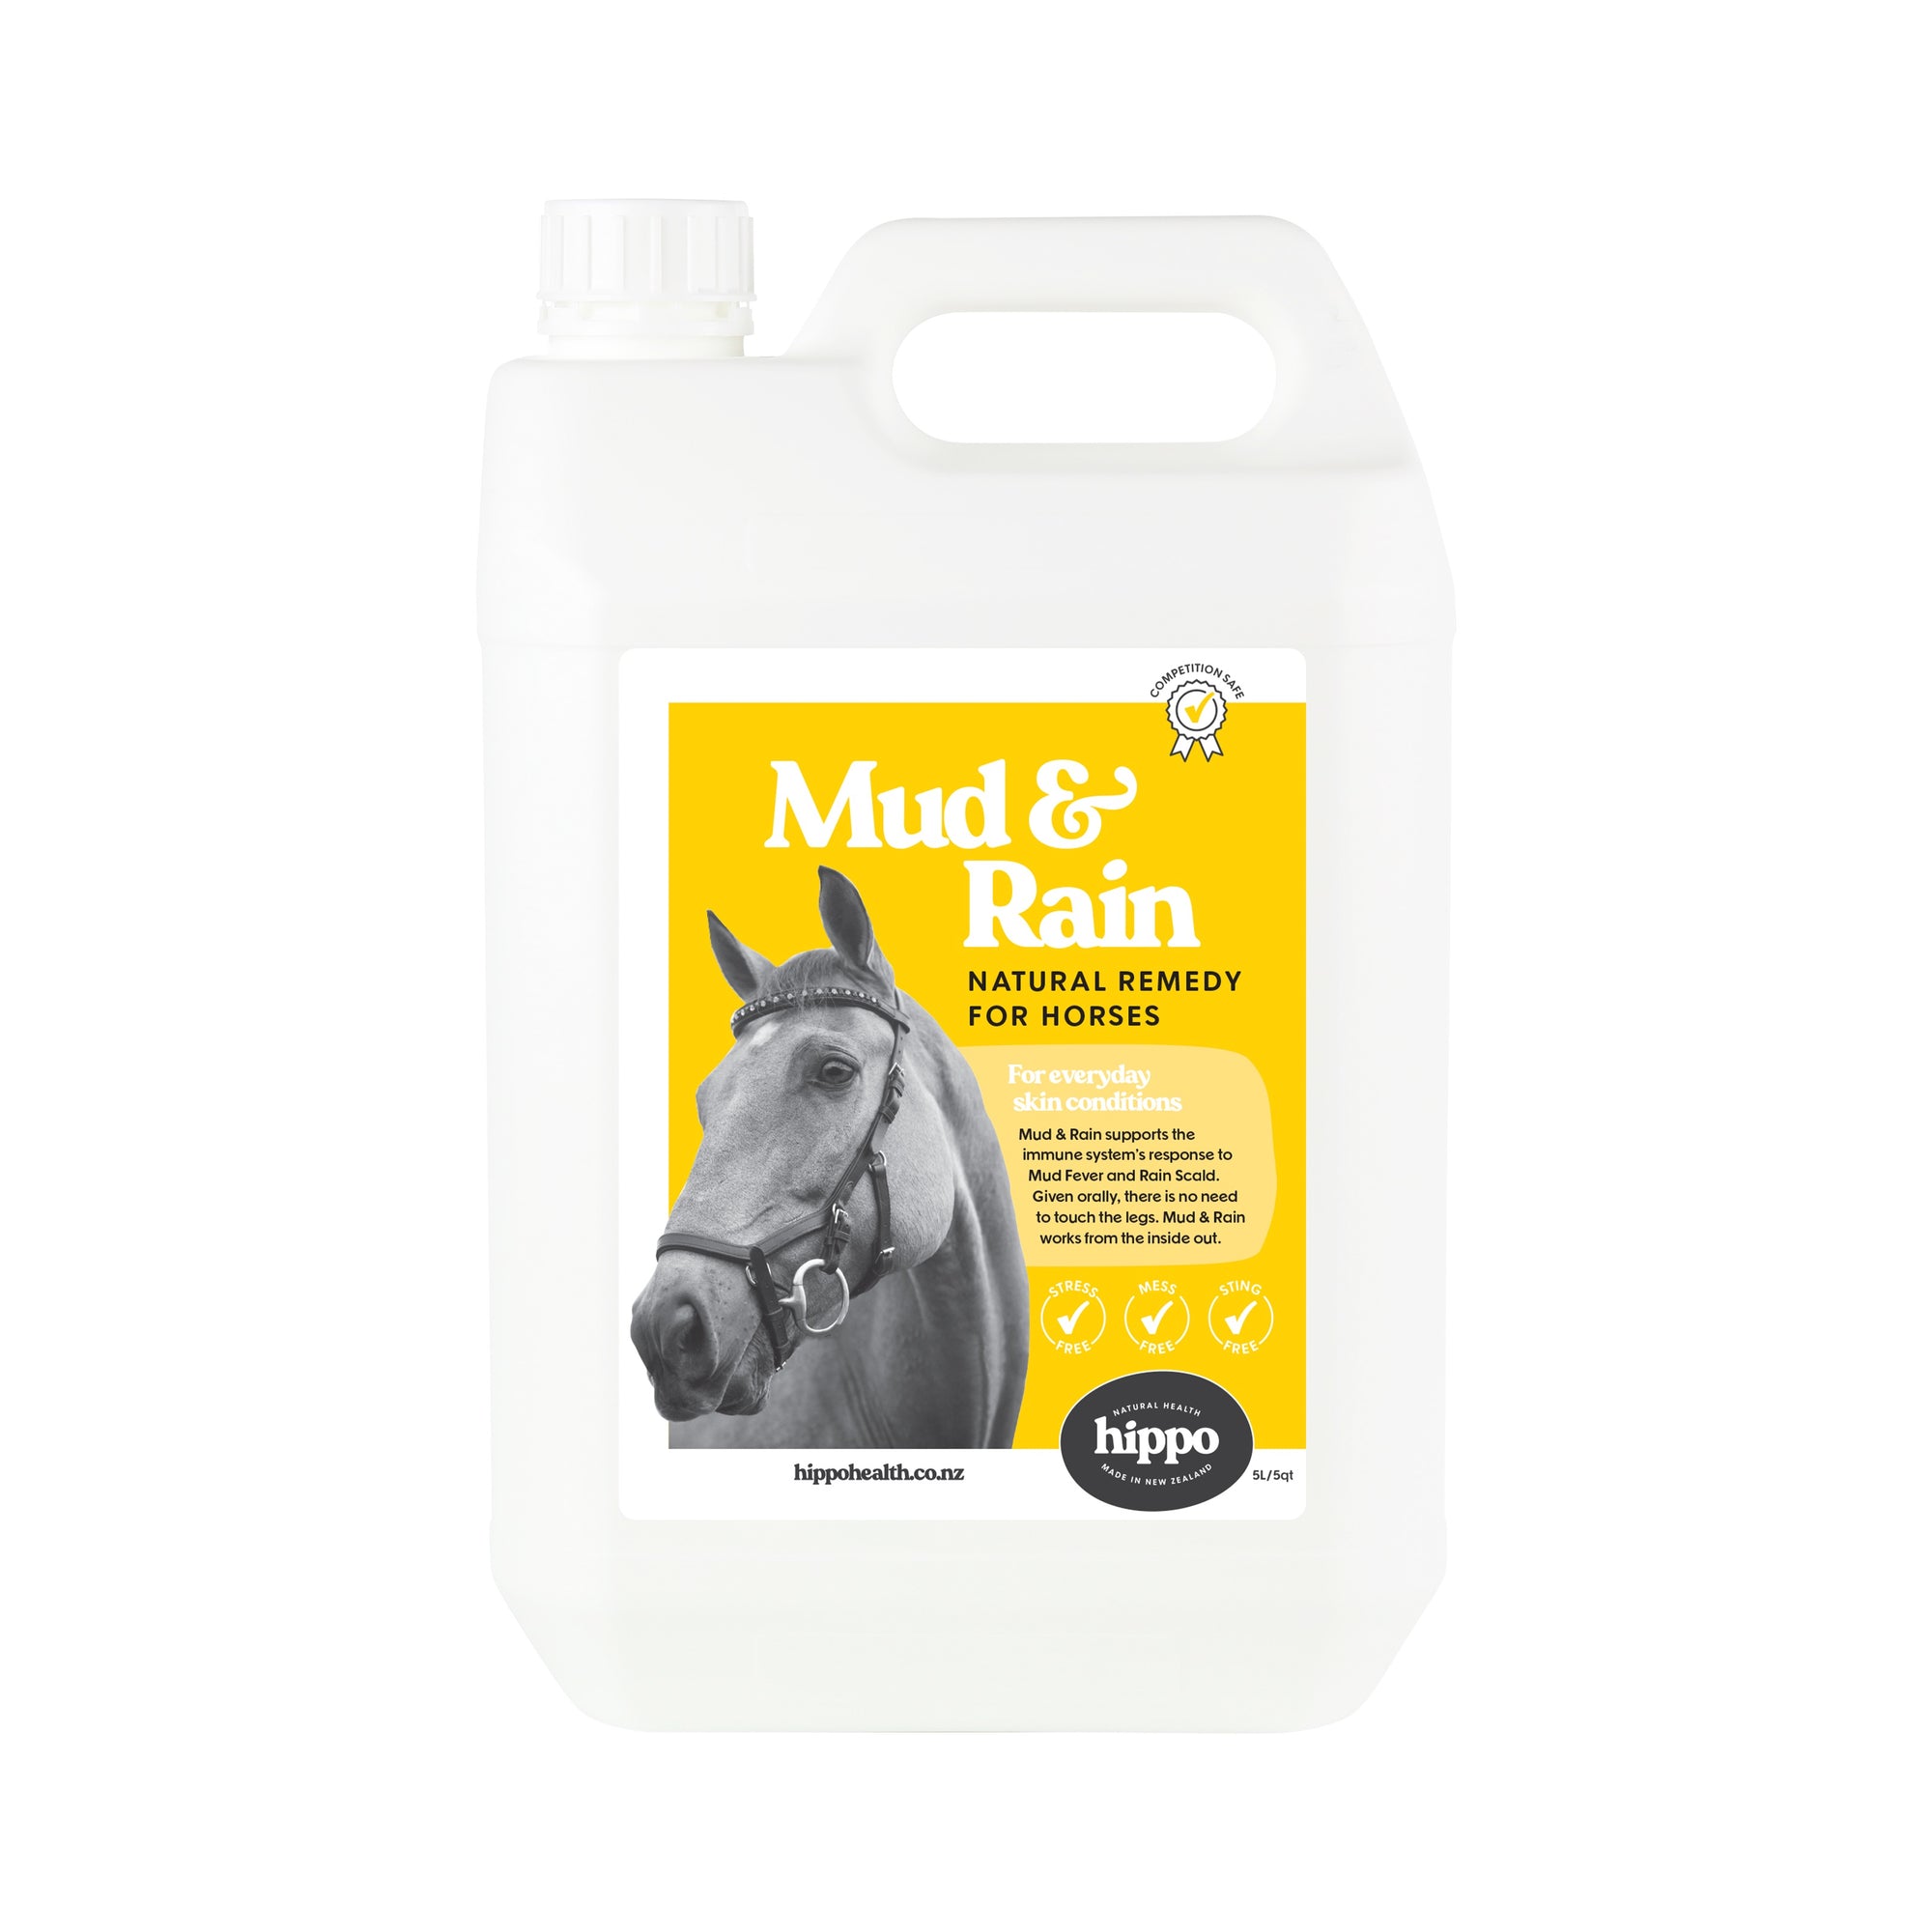 Mud & Rain for Horses (5L) is a ground-breaking natural supplement for horses can be used for greasy heel, mud fever or rain scald/rot.